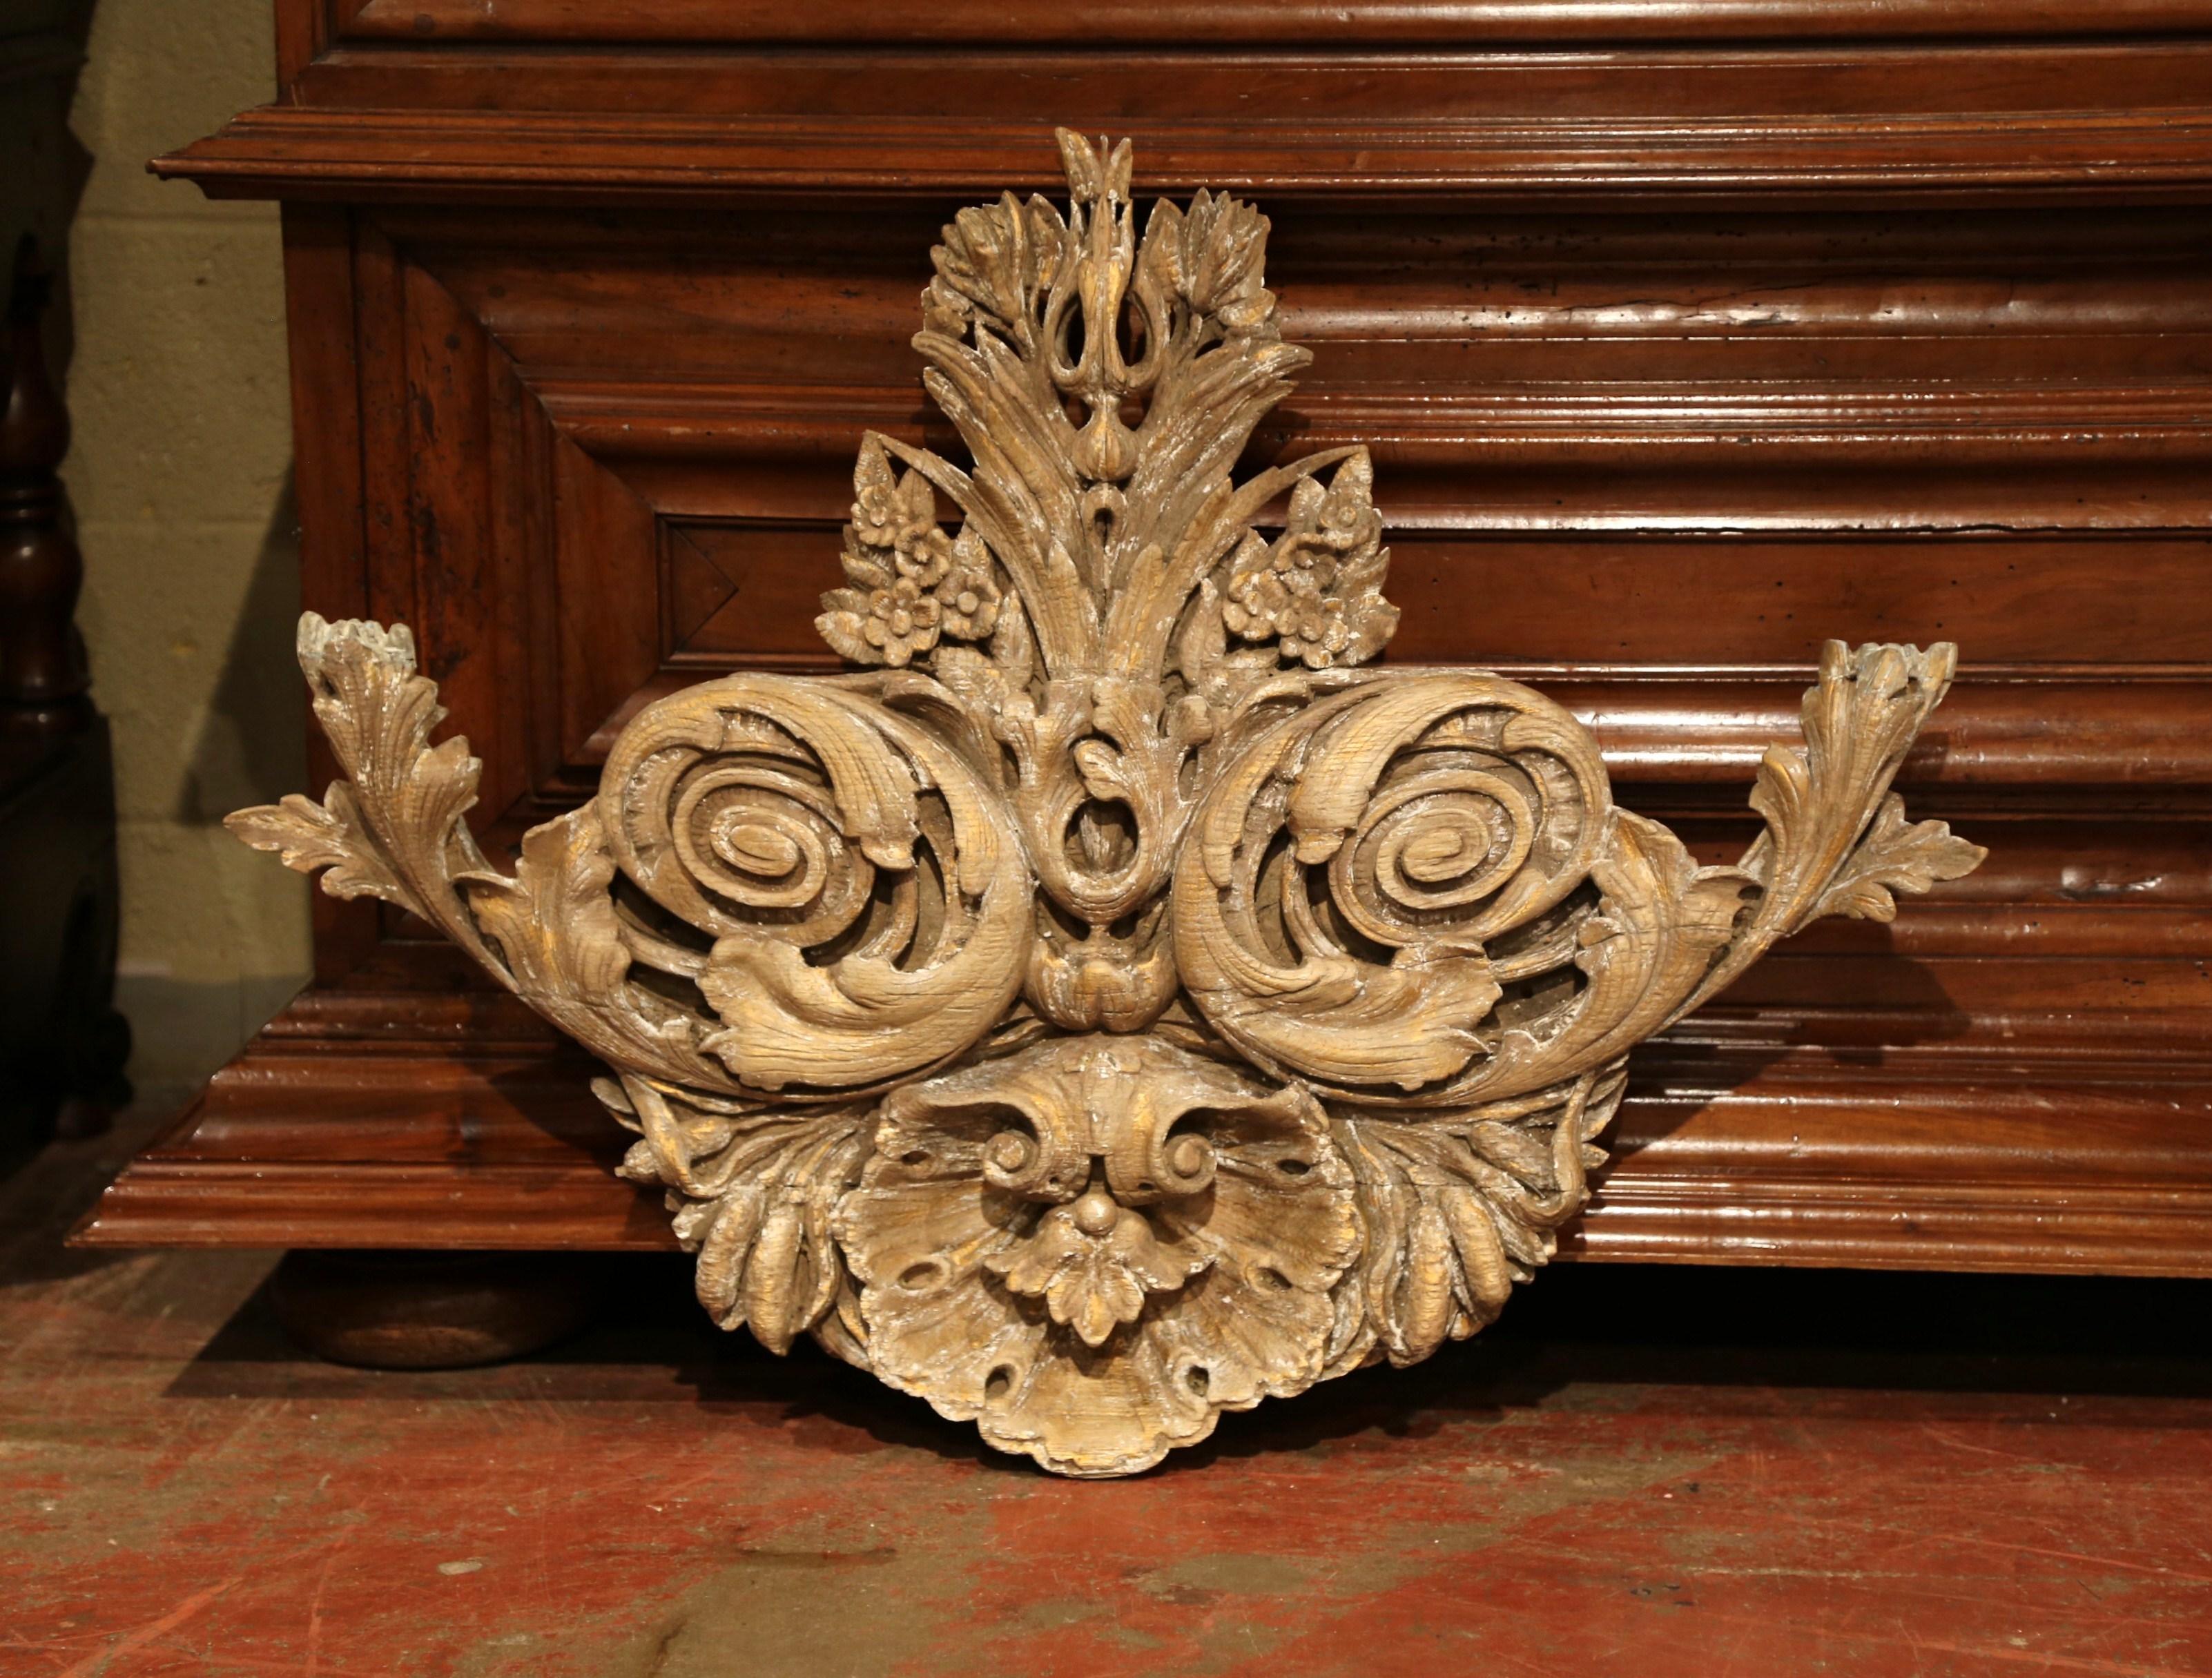 Hand-Carved 18th Century French Carved Oak Painted and Gilt Wall Sculpture with Shell Motif